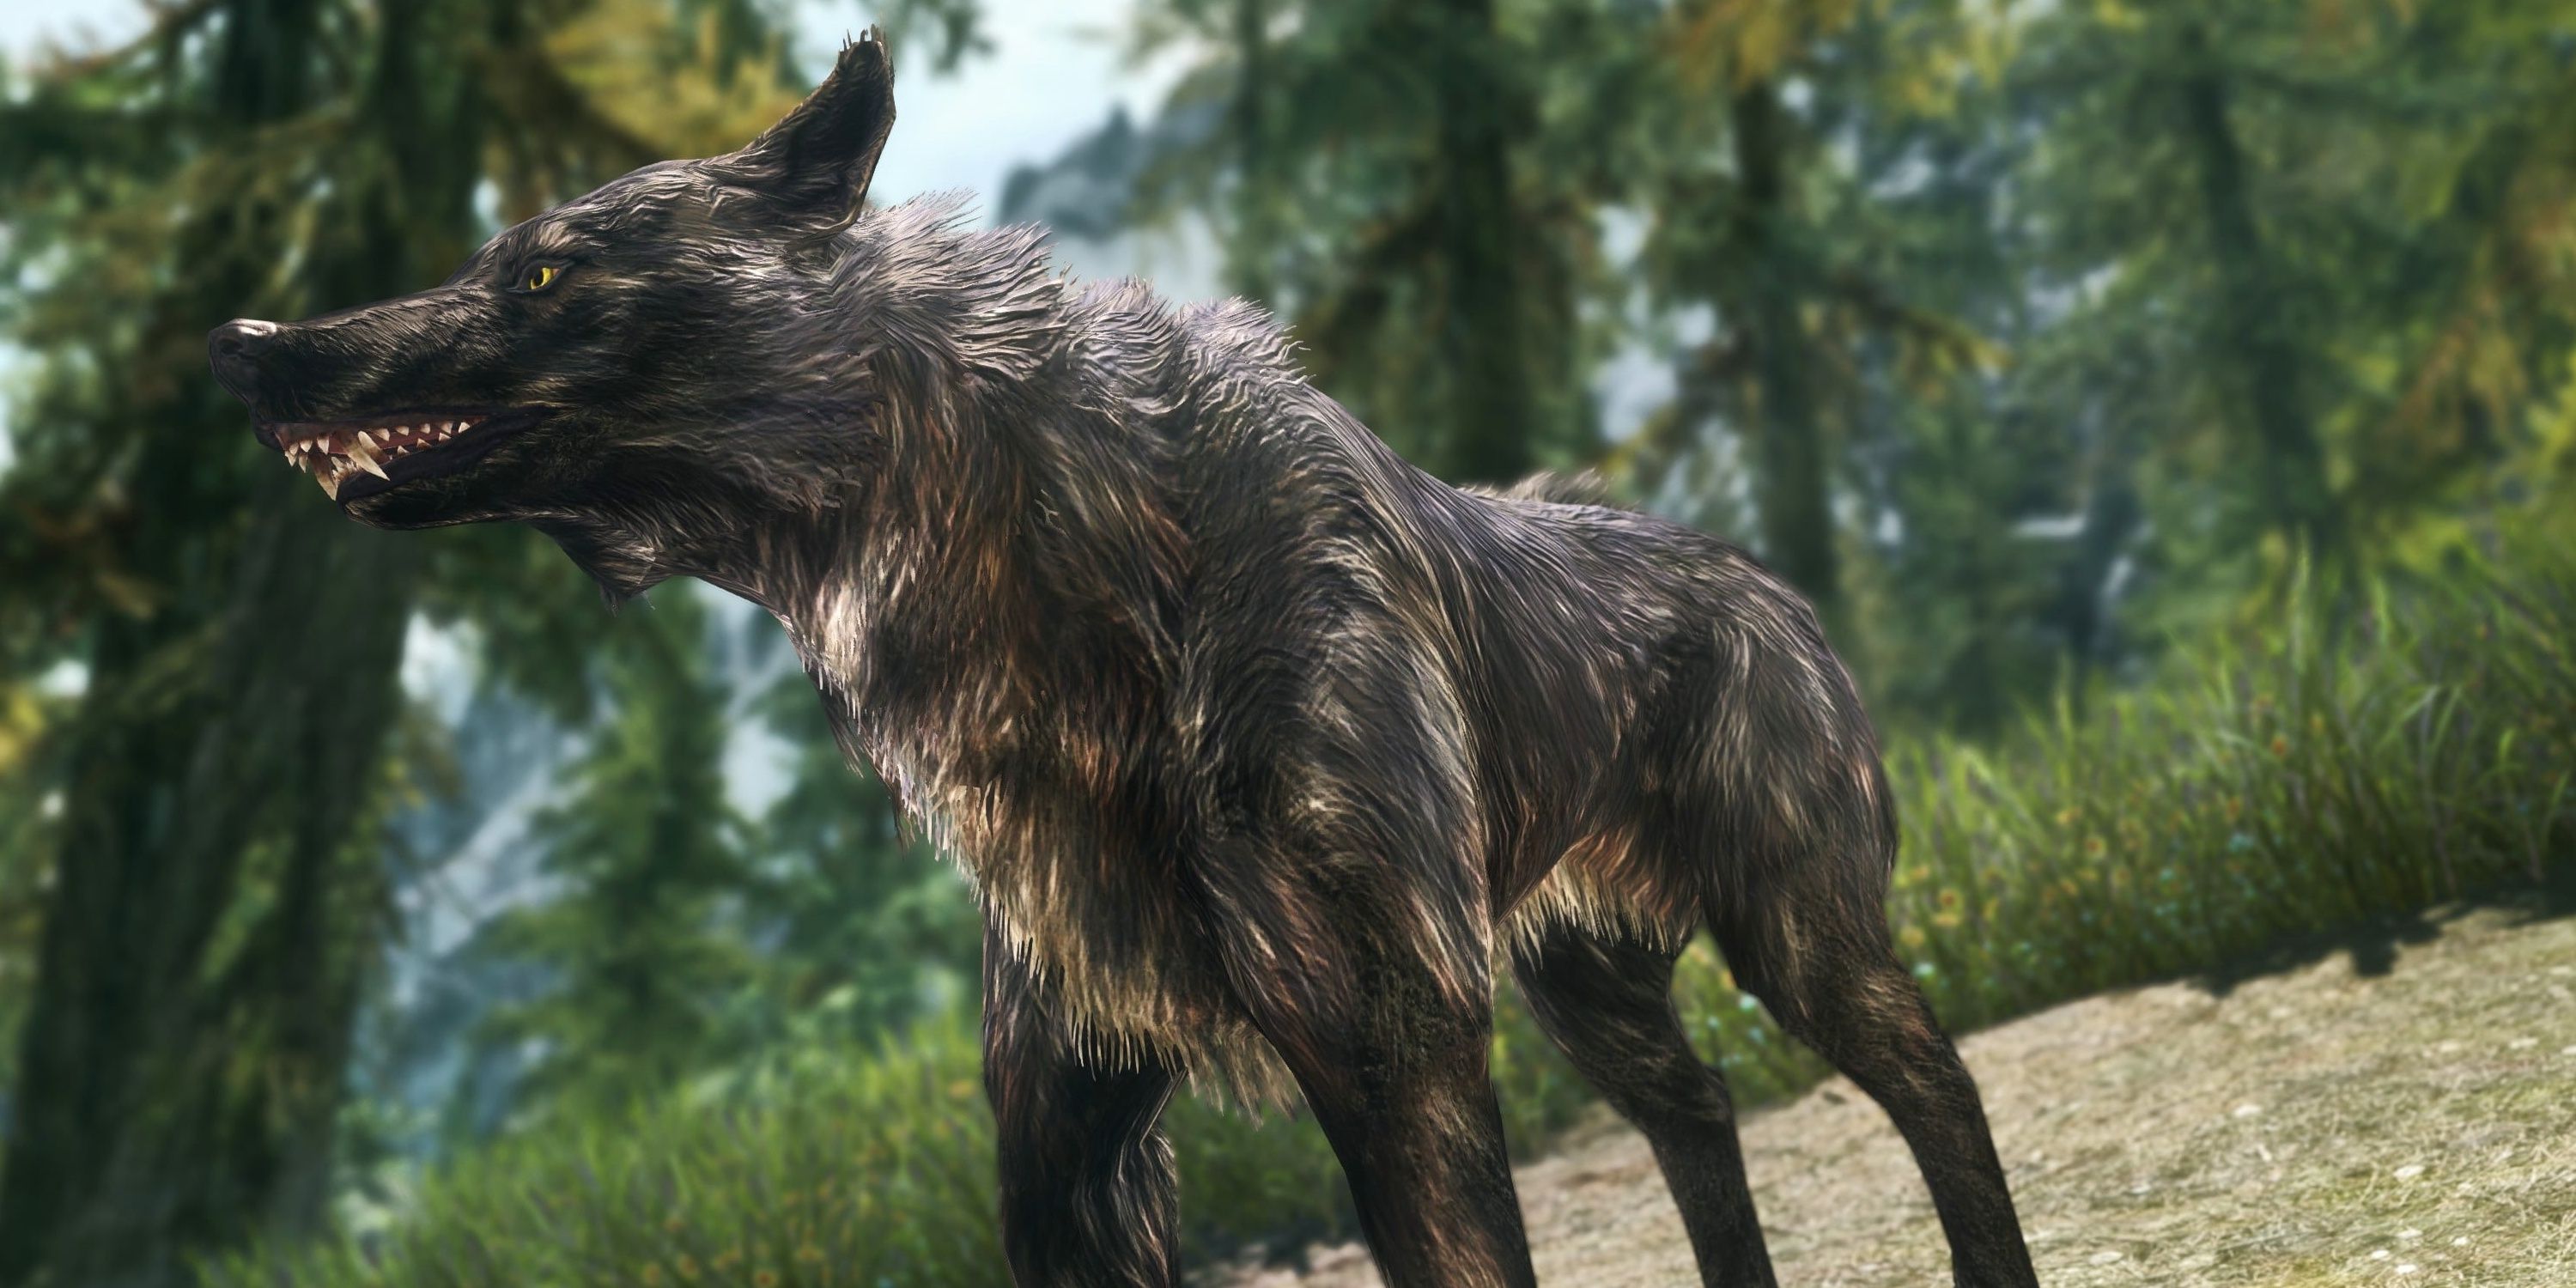 Skyrim's Wolves Are Commonly Encountered In The Wilds